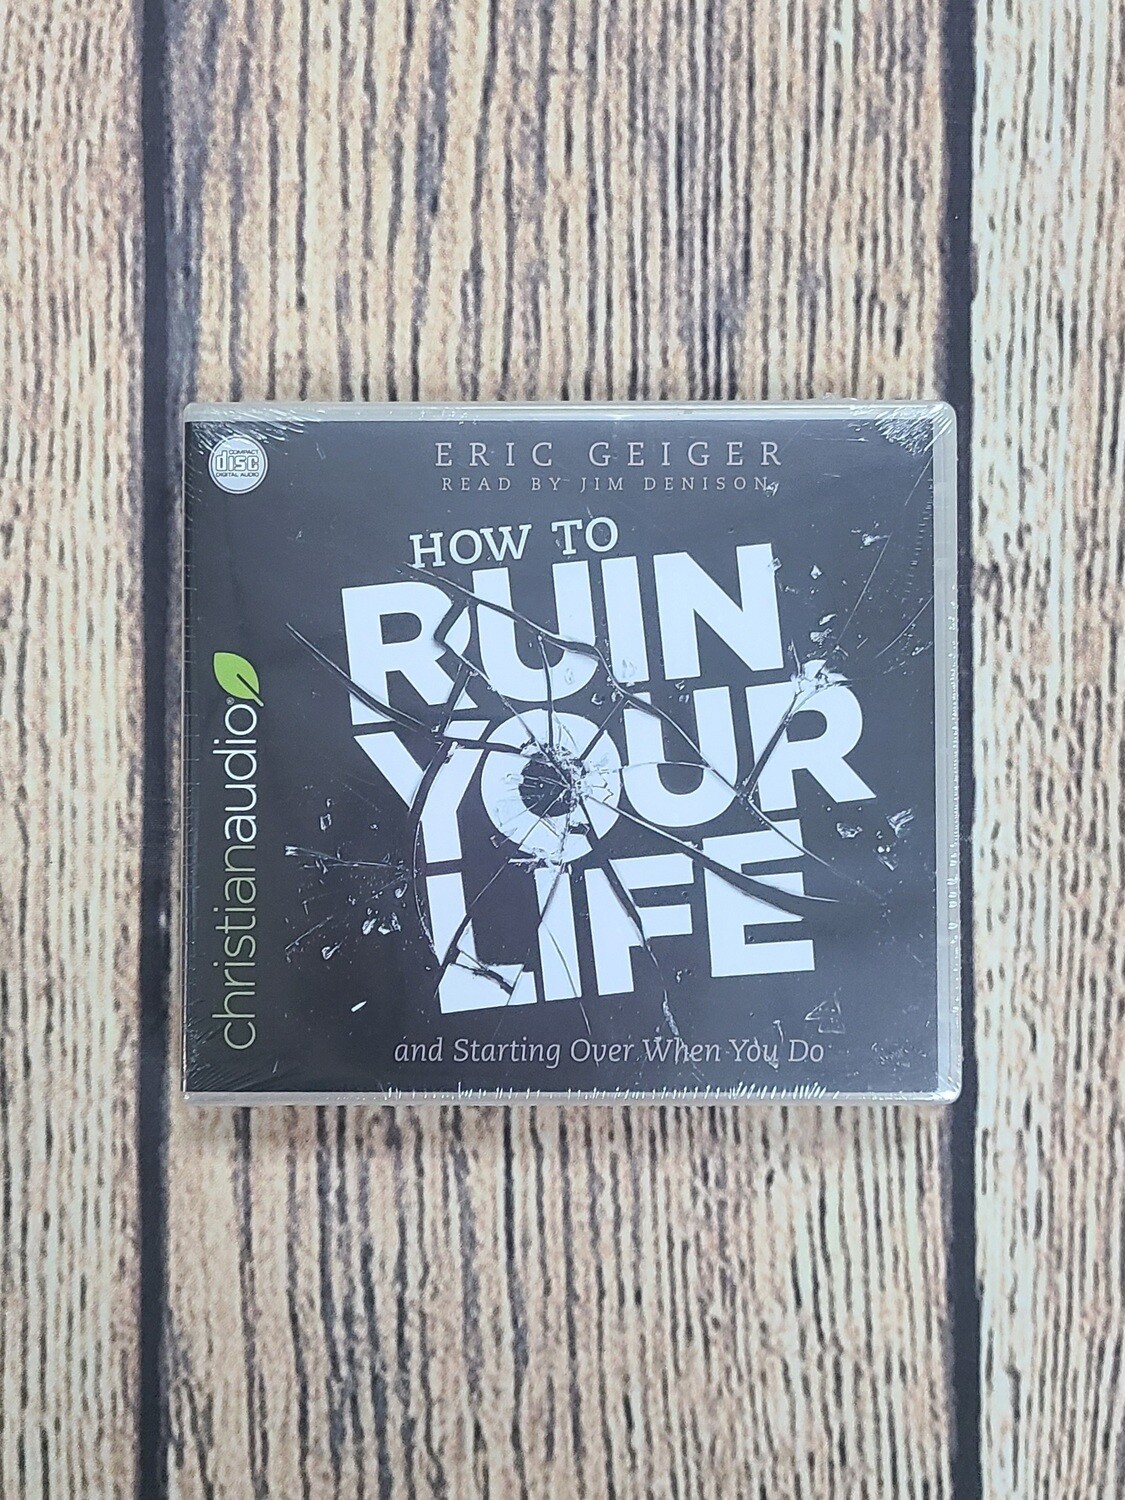 How to Ruin Your Life by Eric Geiger Audiobook